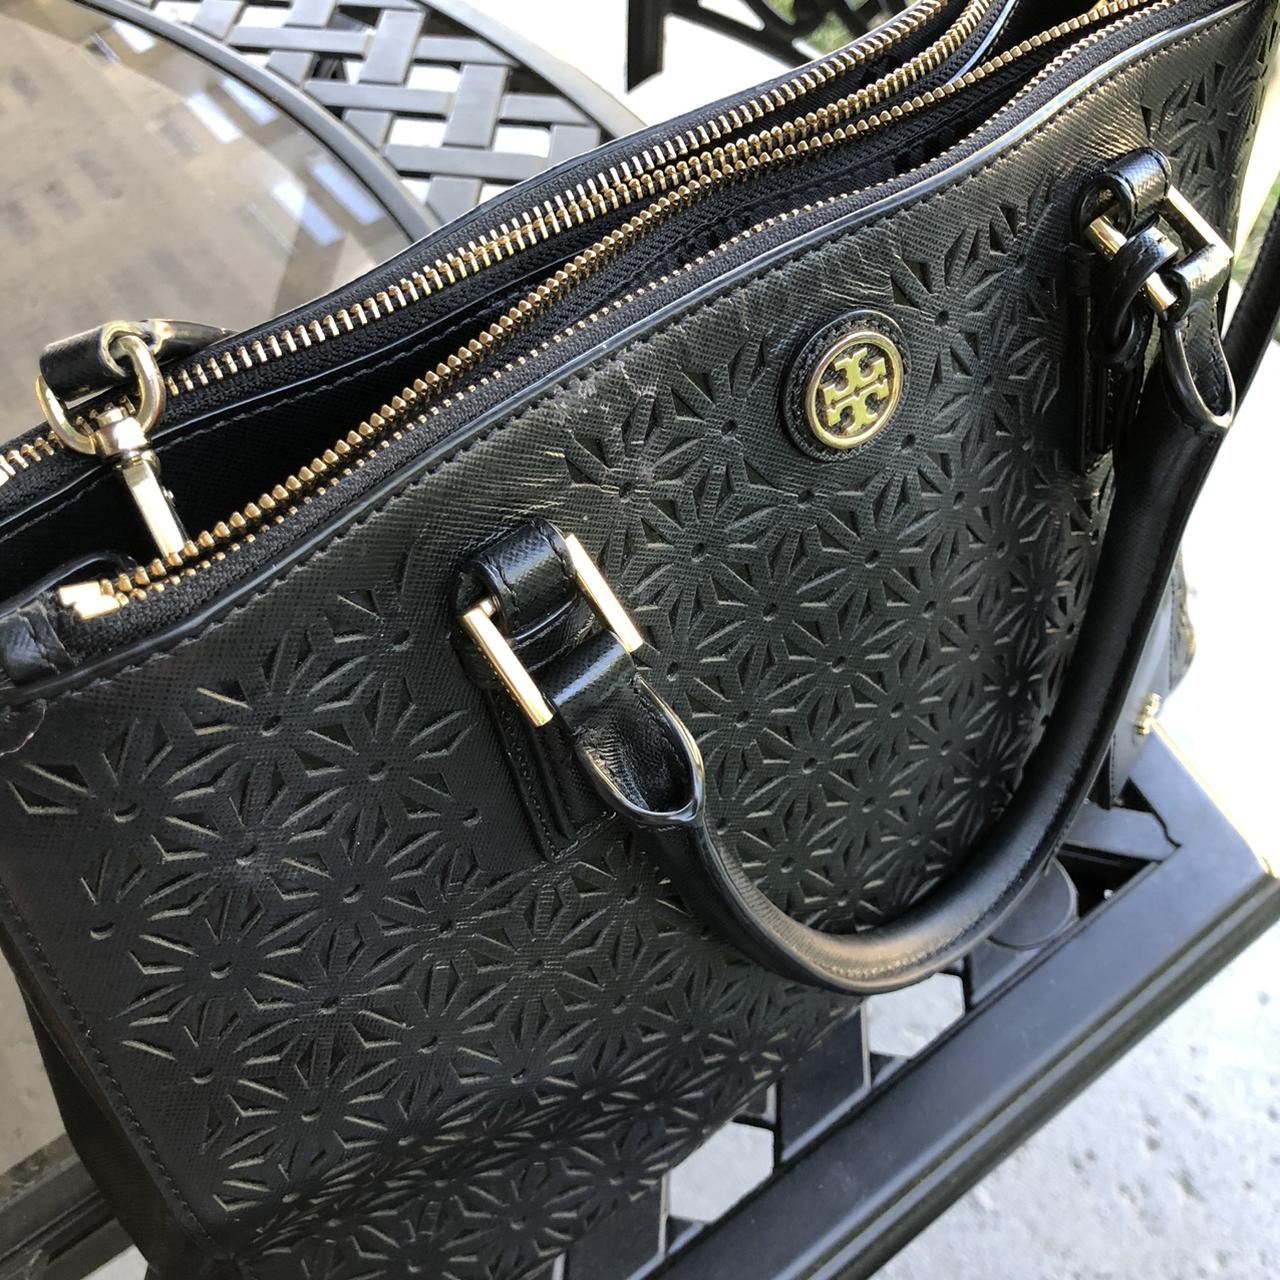 Nordstrom Can Barely Keep This Tory Burch Bag in Stock | Us Weekly